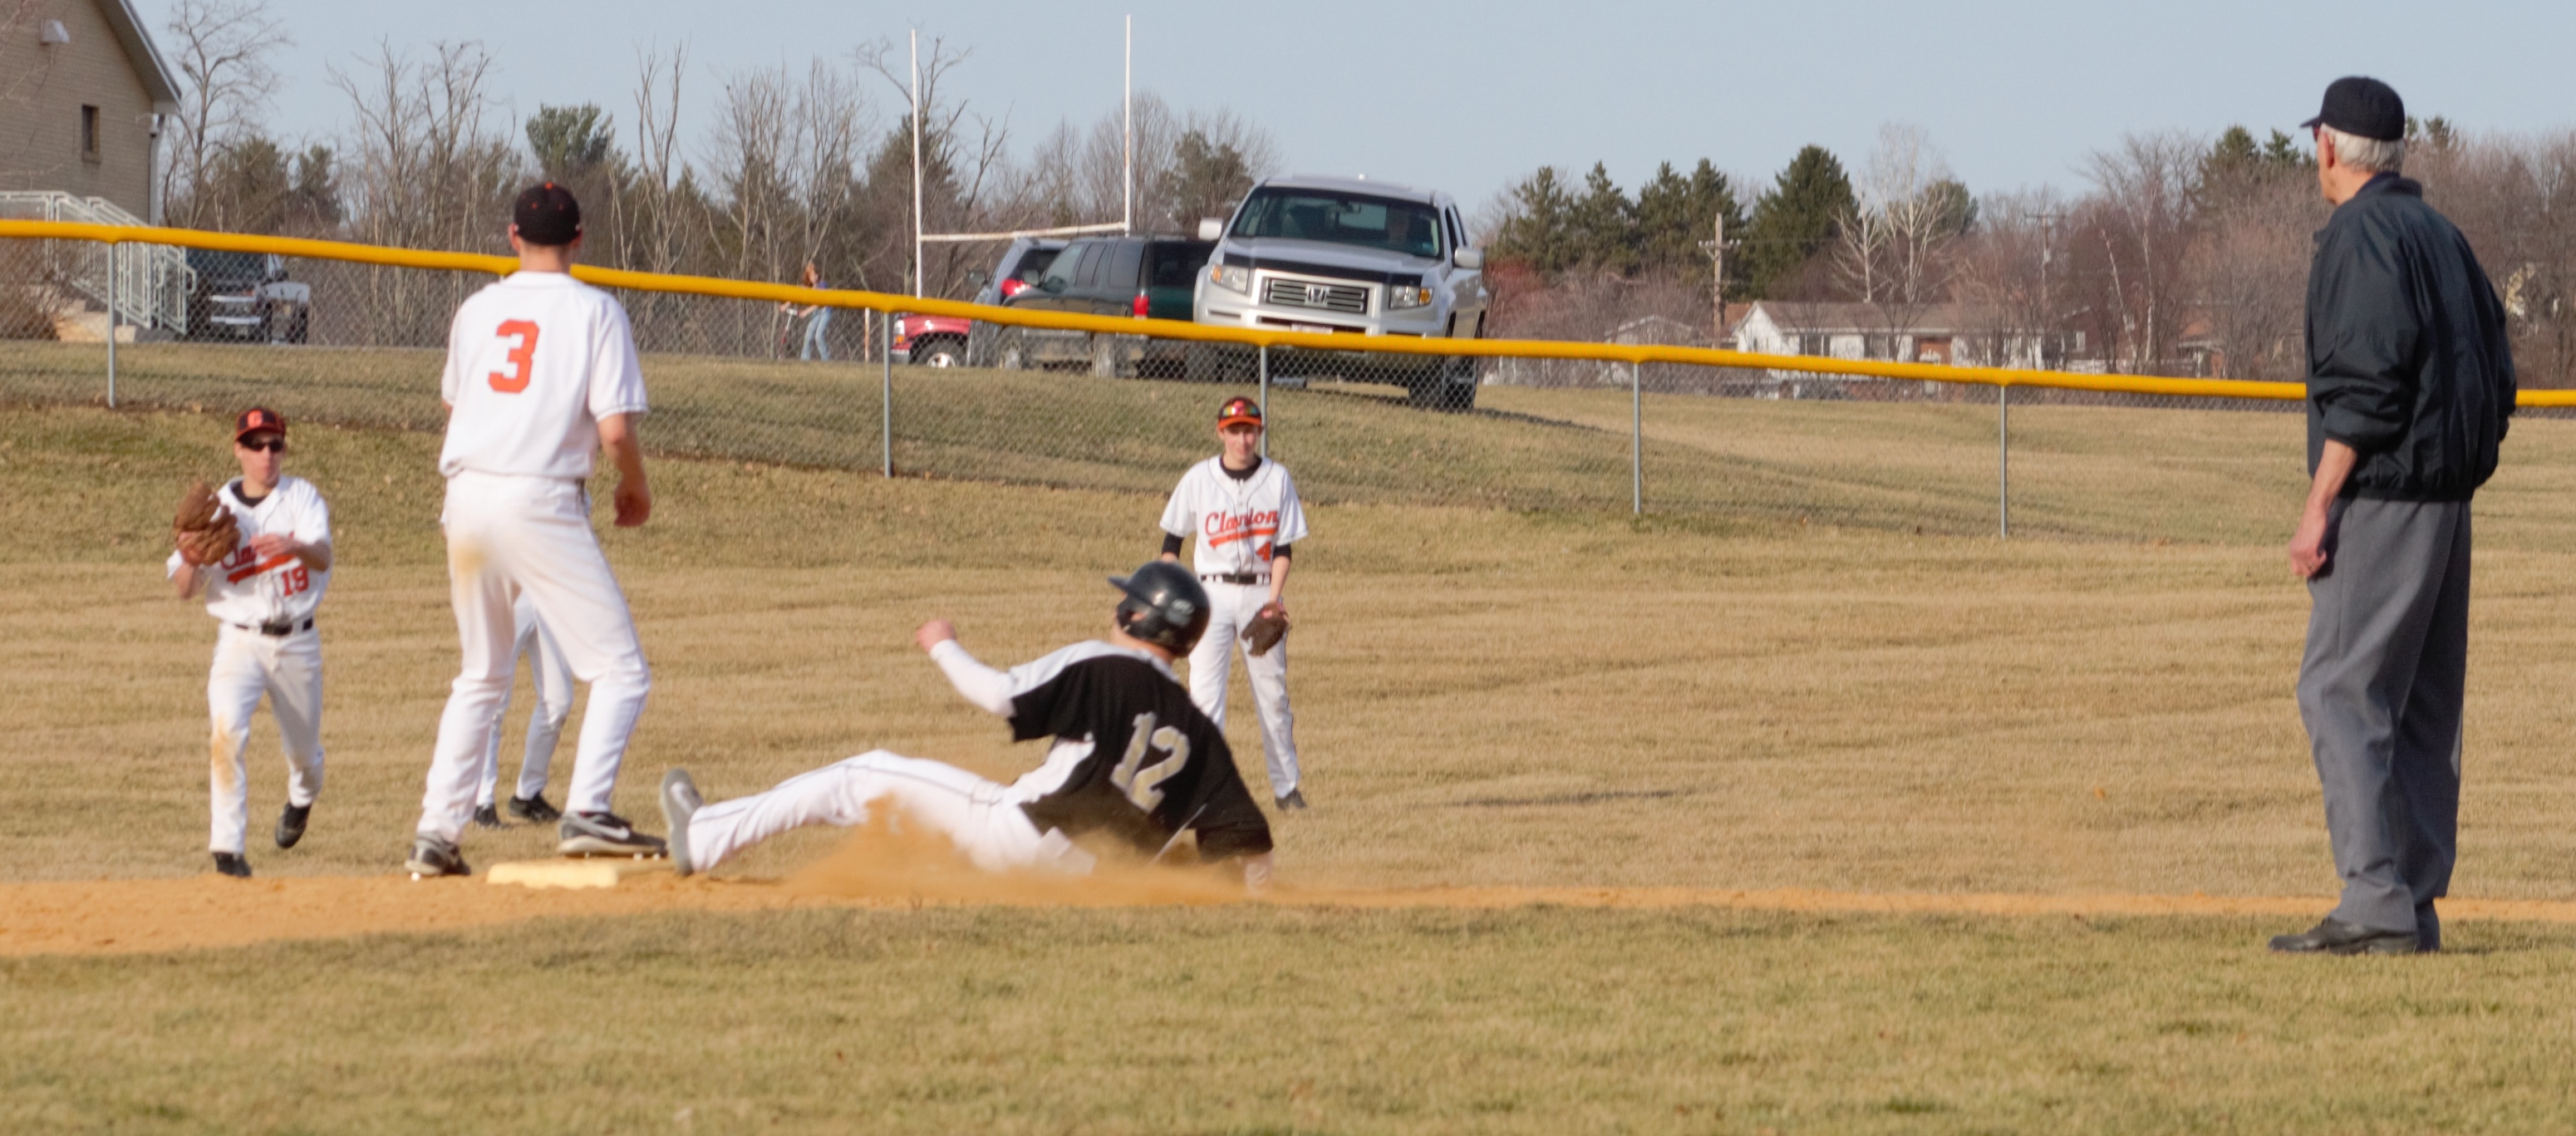 DRAWING A CROWD -Curwensville Senior Tanner Elensky slides safely into second base after a pop-up single by  Travis Lansberry as several Clarion players converge on the play.  Clarion bested Curwensville 10-0 in favie innings yesterday afternoon.  (photo by Rusty McCracken)